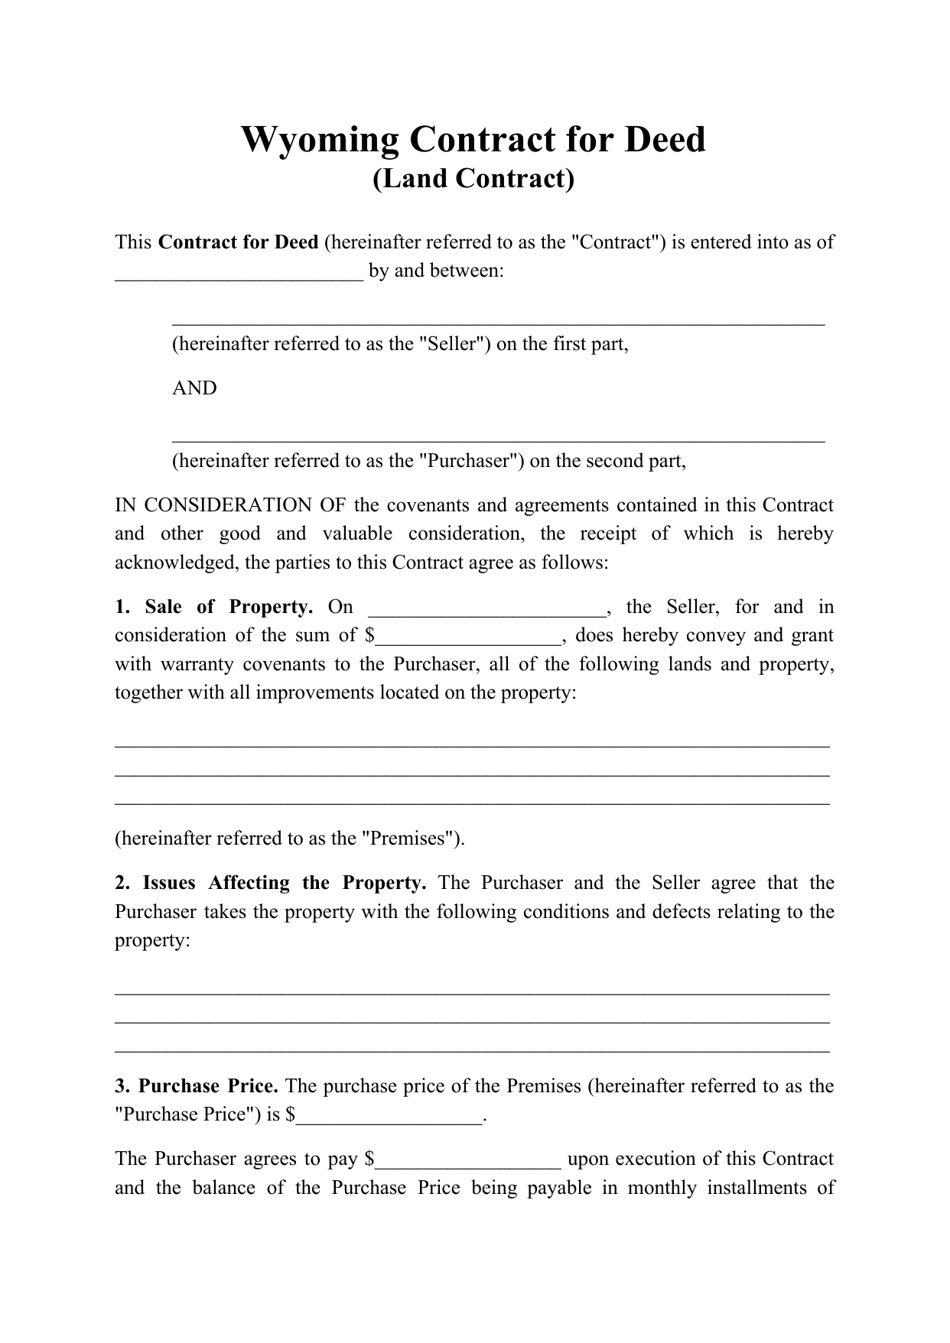 Contract for Deed (Land Contract) - Wyoming, Page 1